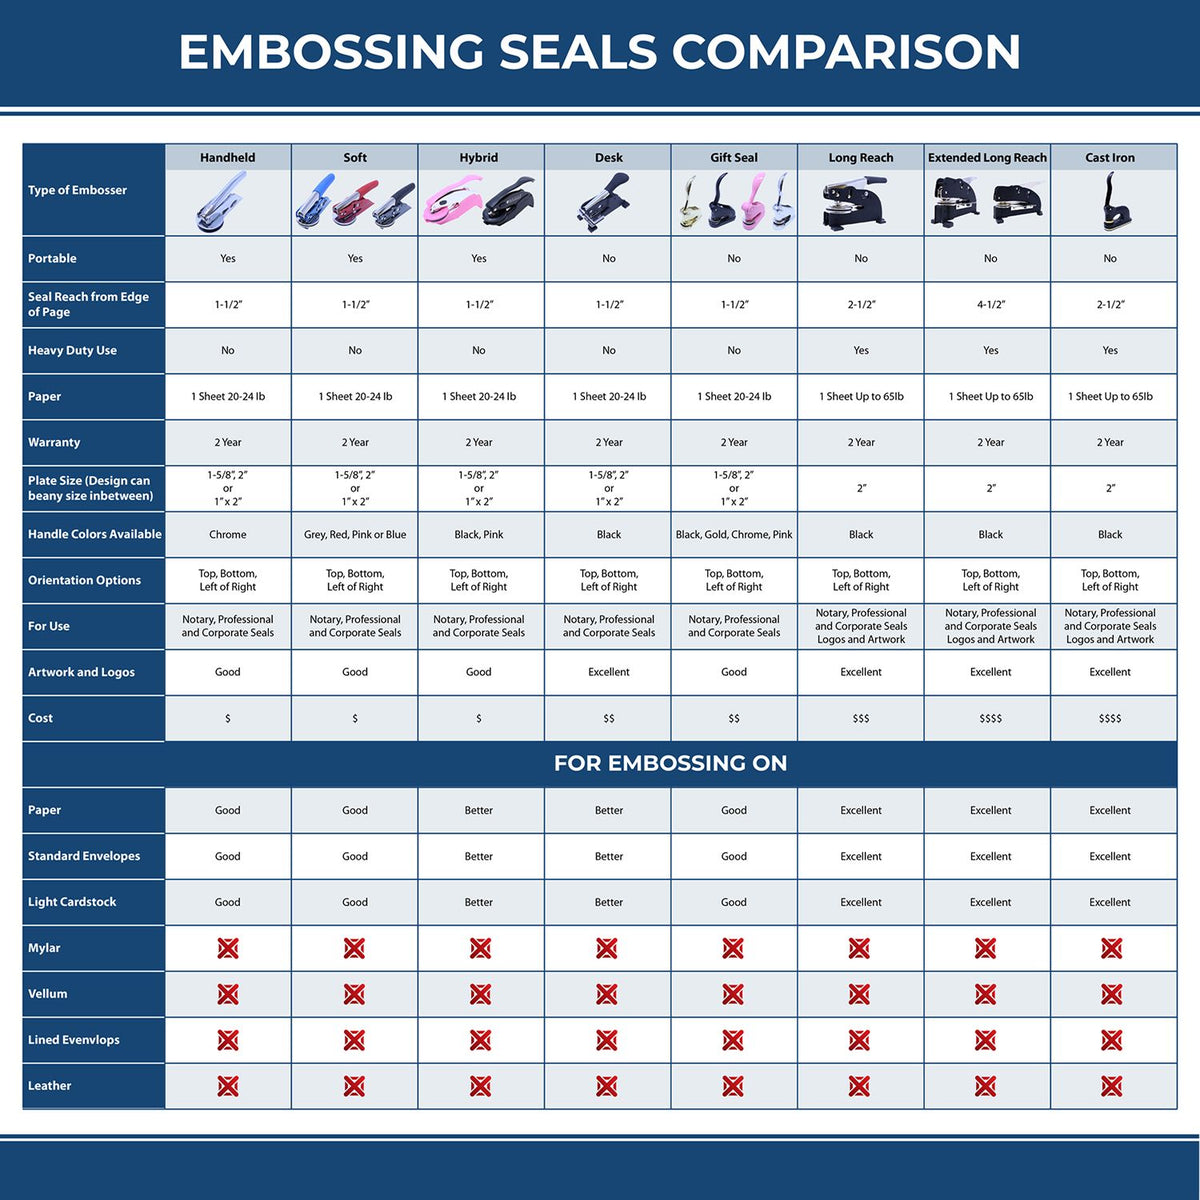 A comparison chart for the different types of mount models available for the State of Vermont Soft Land Surveyor Embossing Seal.